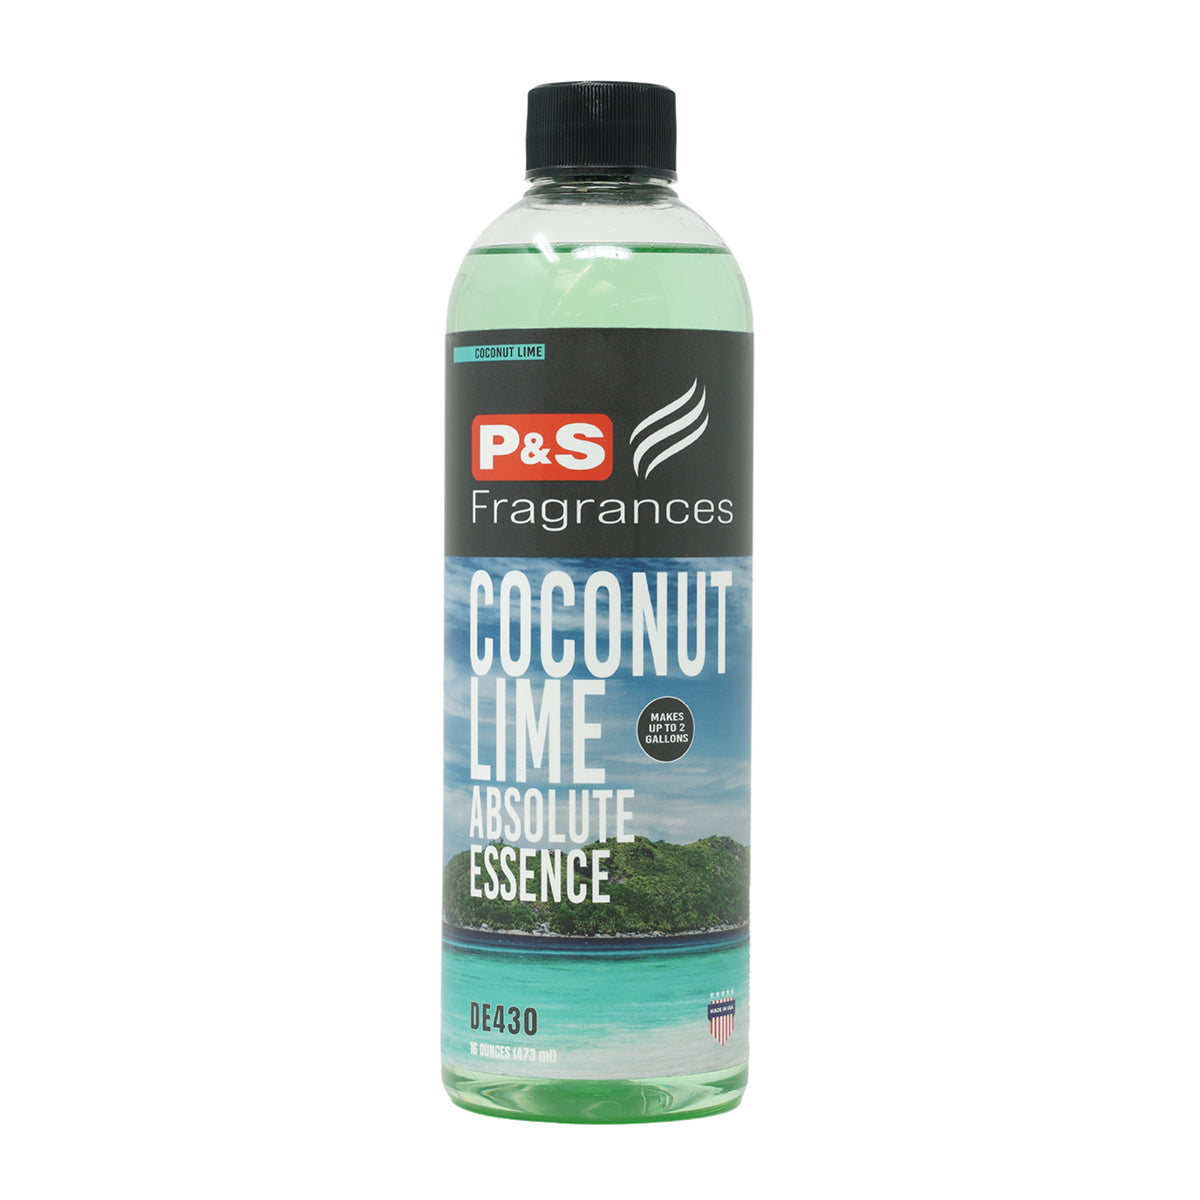 P&S Coconut Lime Air Freshener (Absolute Essence) Concentrate 473ml